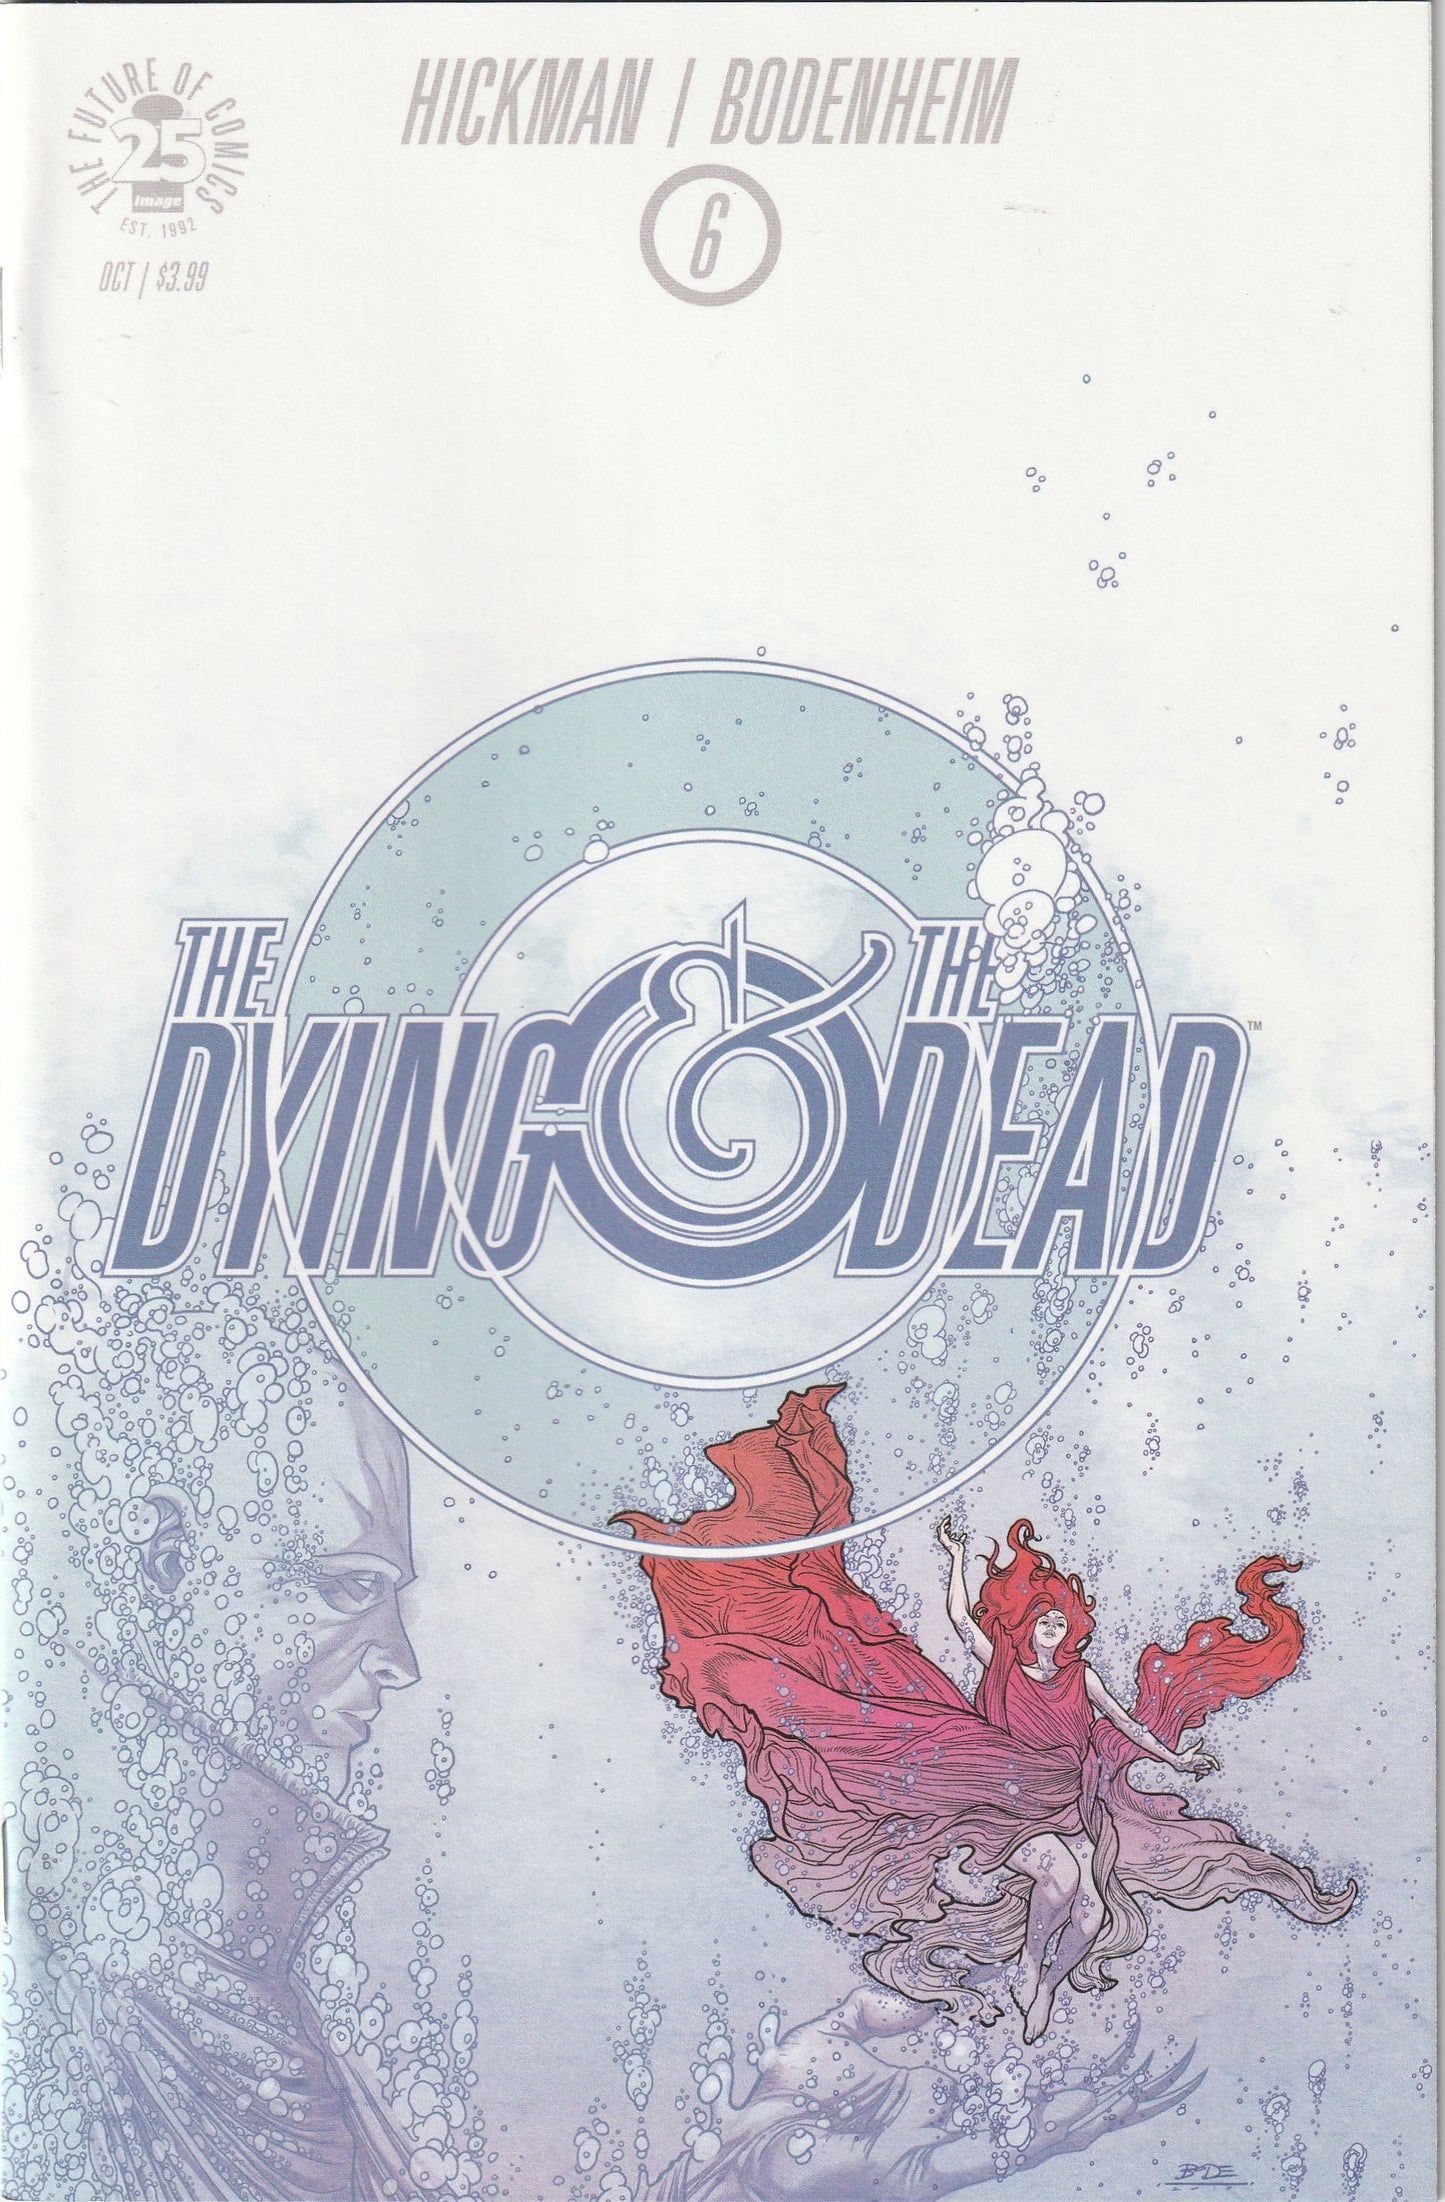 The Dying & The Dead #6 (2017) - Jonathan Hickman